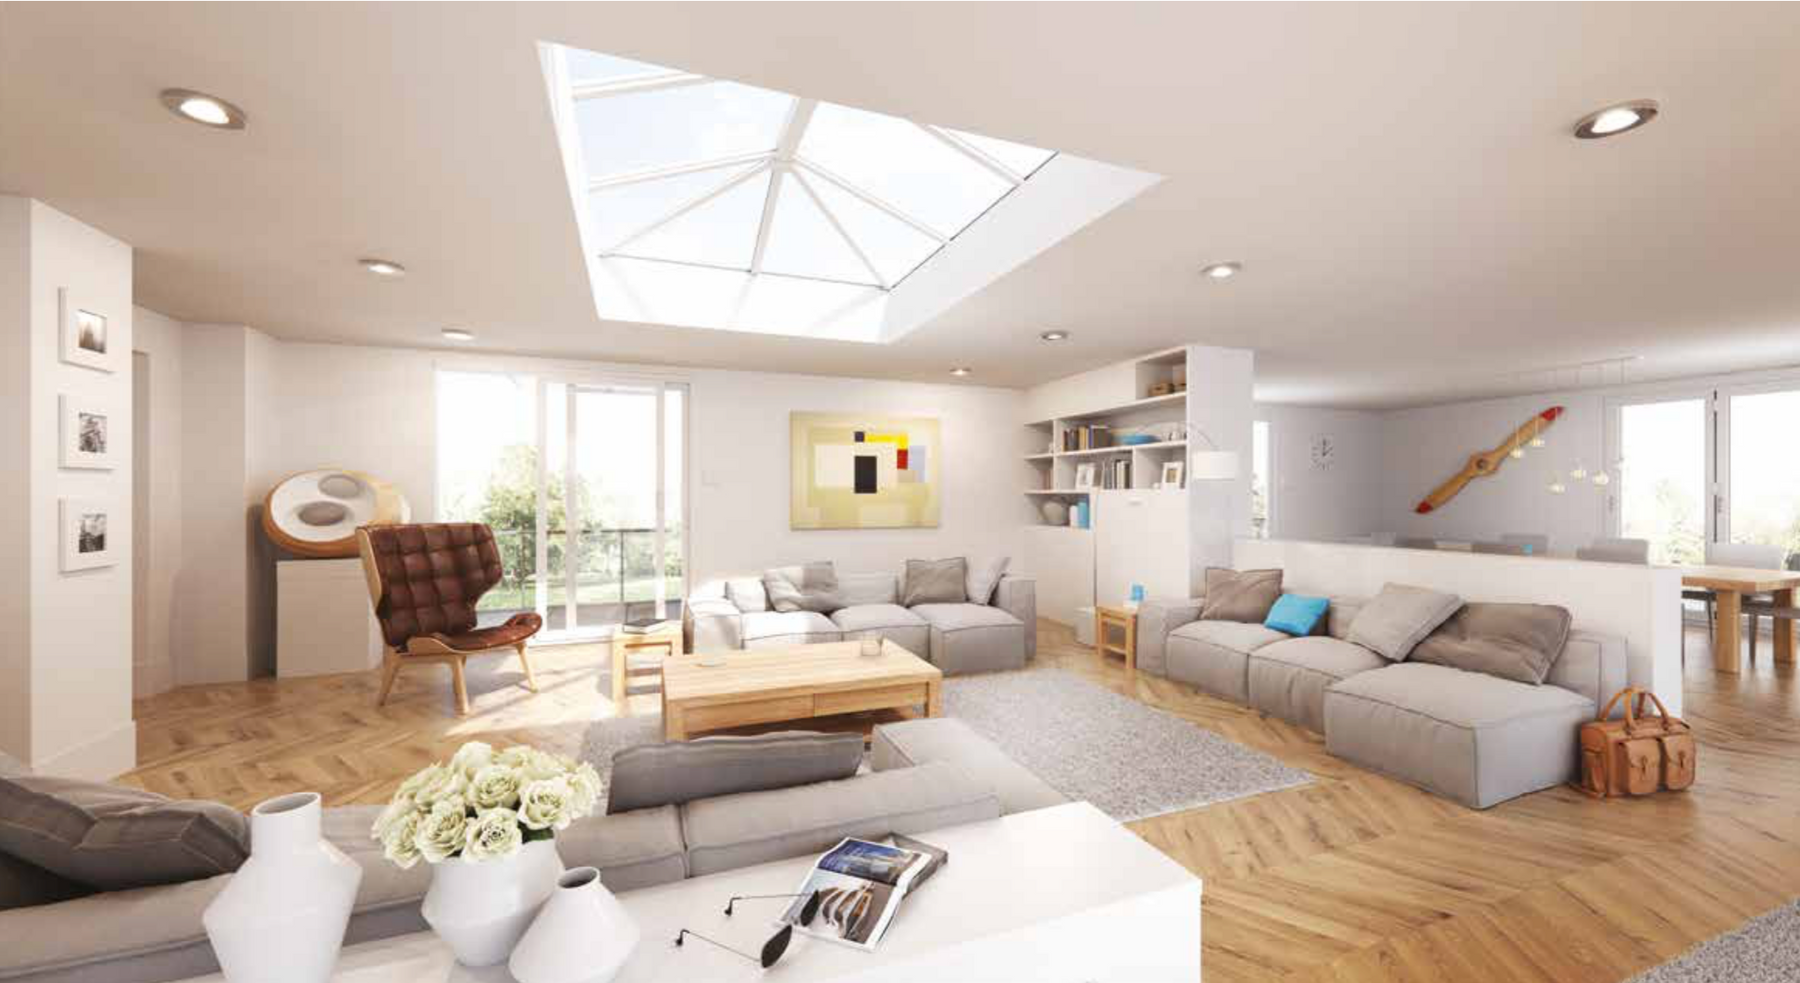 Illuminate Your Home: Introducing the Stratus Roof Lantern for Natural Daylight